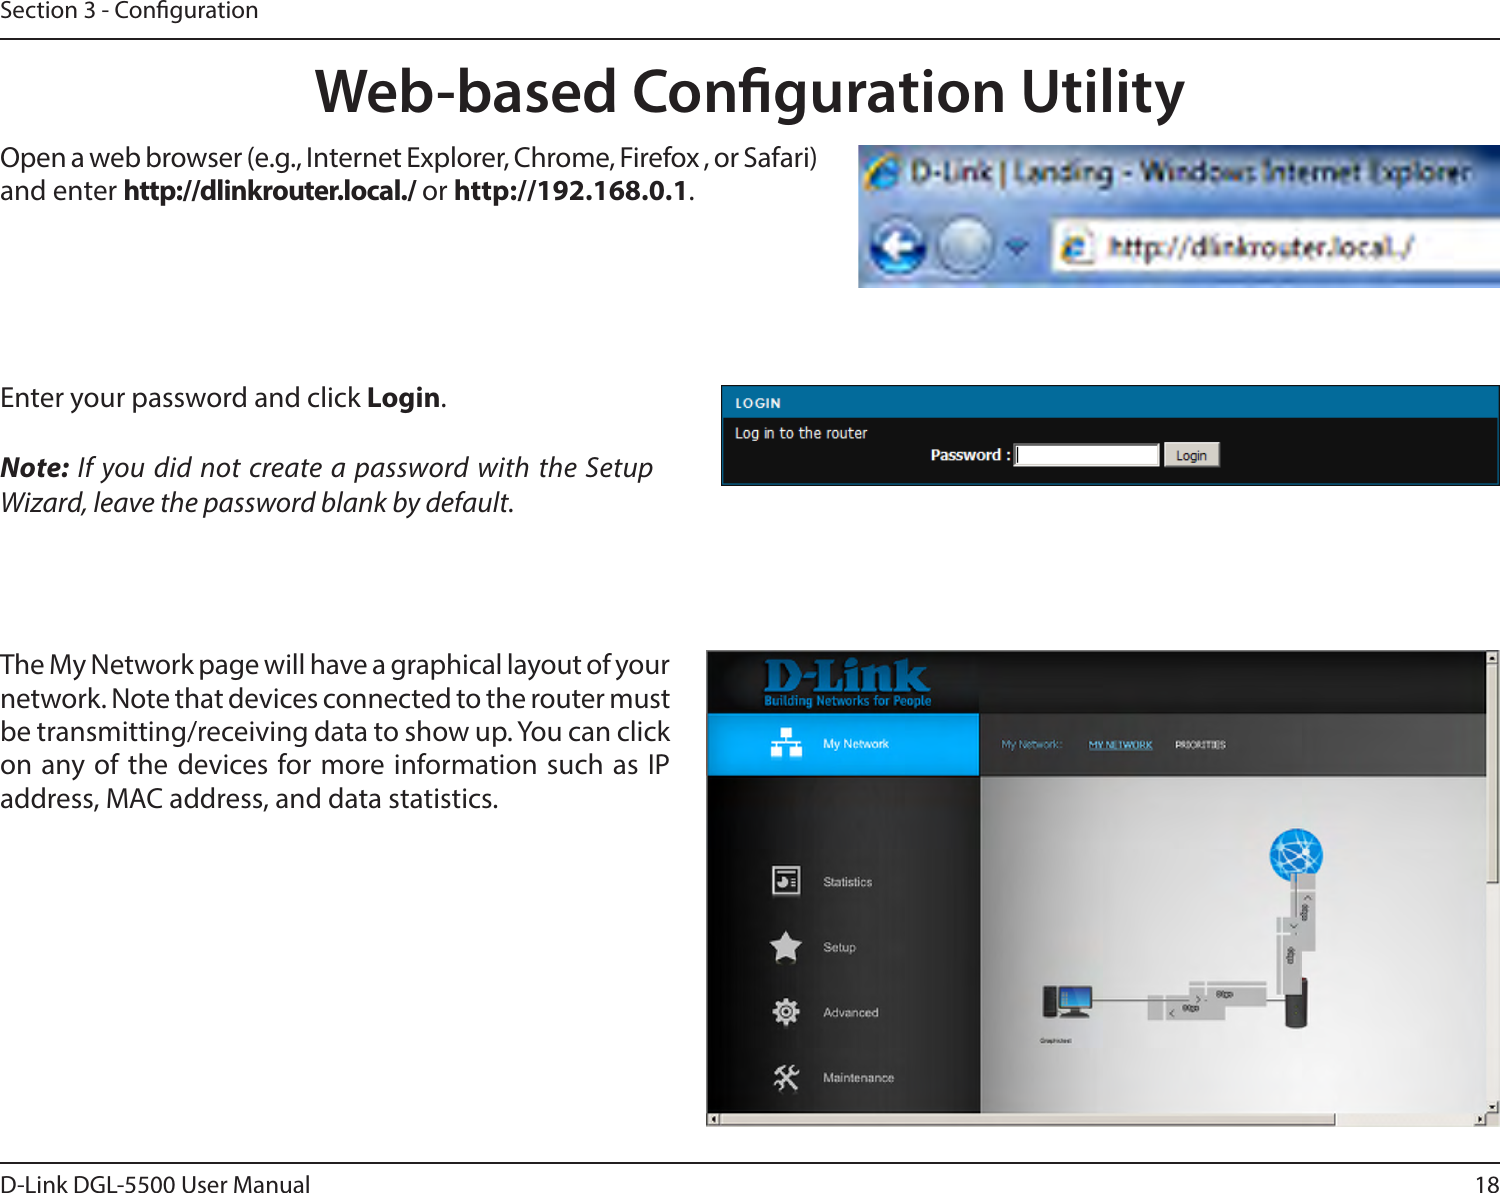 18D-Link DGL-5500 User ManualSection 3 - CongurationWeb-based Conguration UtilityEnter your password and click Login. Note: If you did not create a password with the Setup Wizard, leave the password blank by default.Open a web browser (e.g., Internet Explorer, Chrome, Firefox , or Safari) and enter http://dlinkrouter.local./ or http://192.168.0.1. The My Network page will have a graphical layout of your network. Note that devices connected to the router must be transmitting/receiving data to show up. You can click on any of the devices for more information such as IP address, MAC address, and data statistics. 